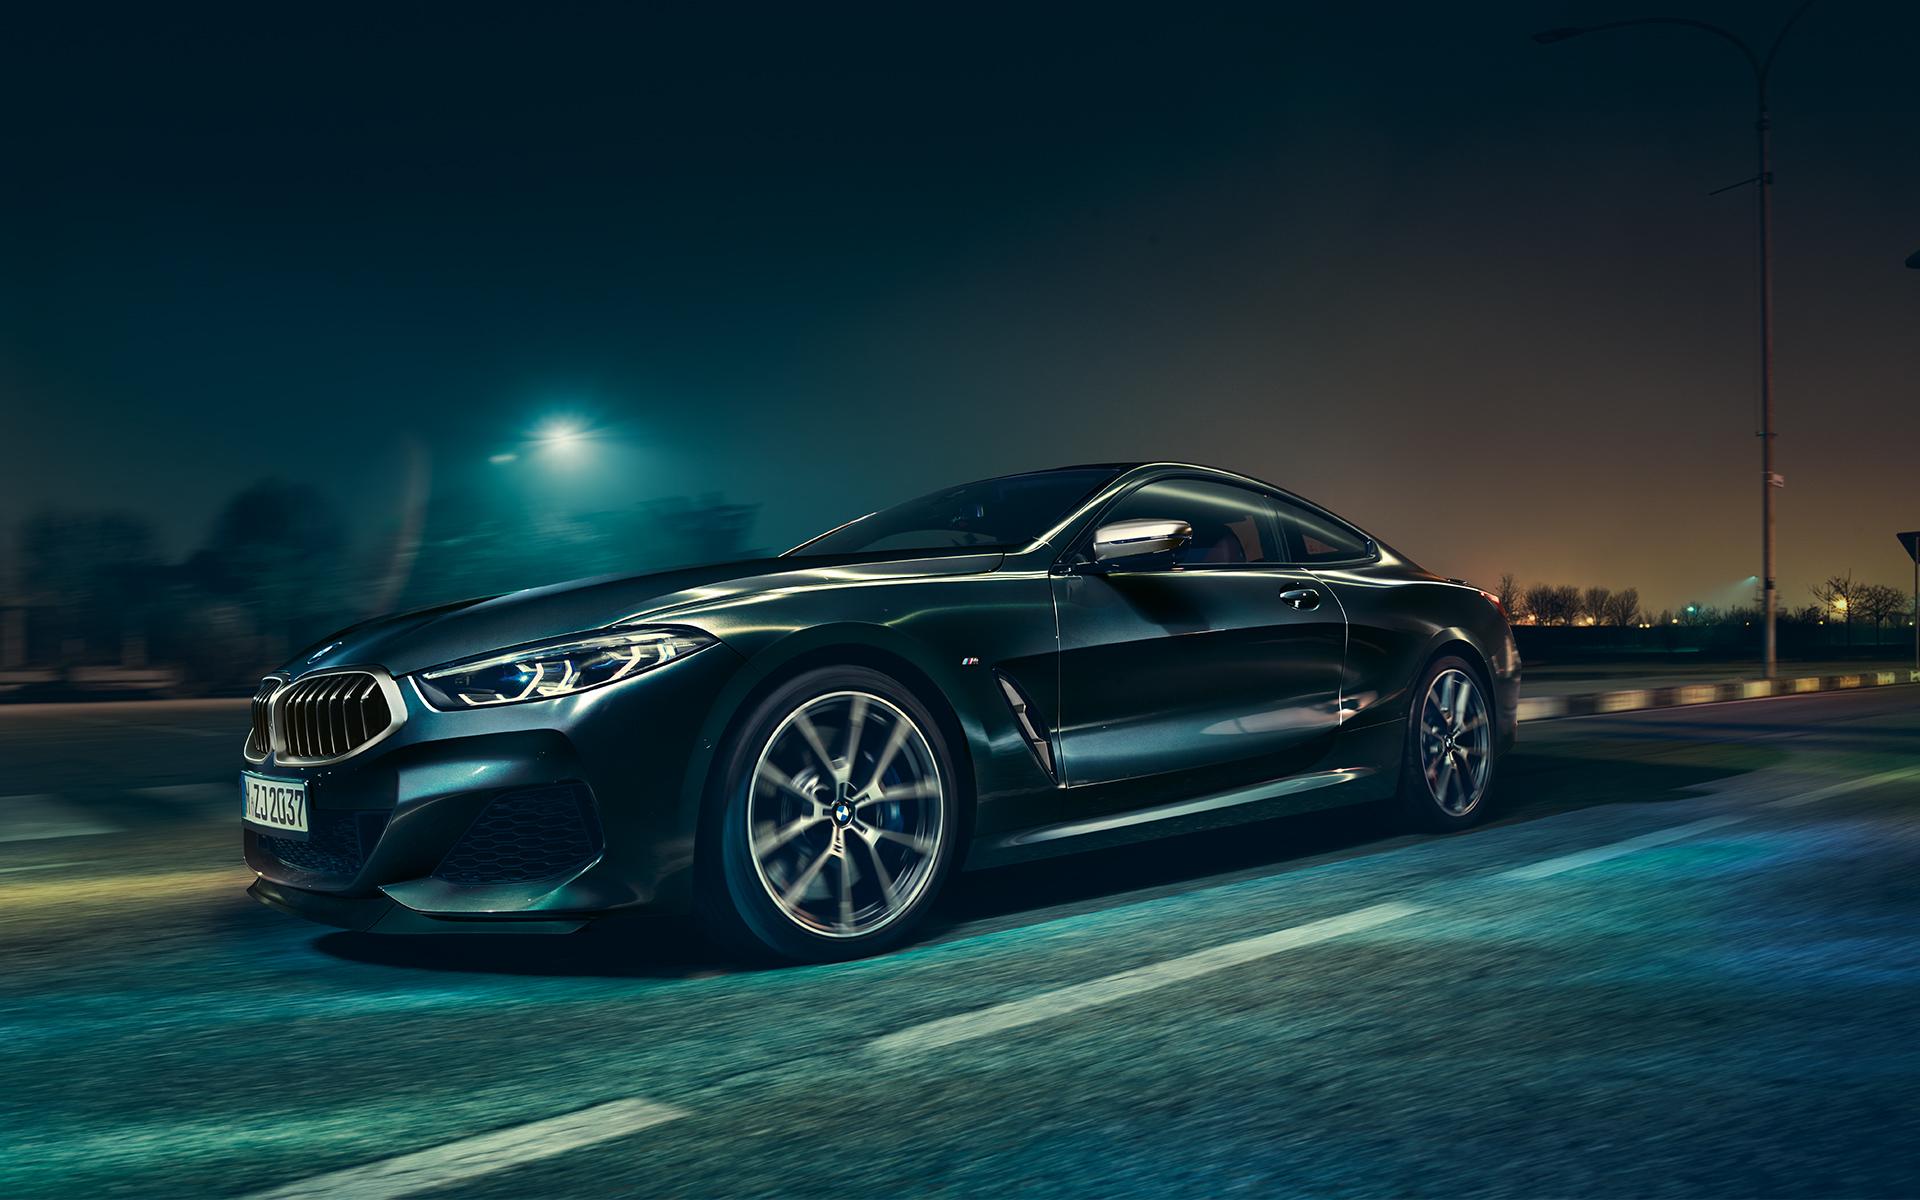 New wallpaper of the BMW 8 Series Coupe